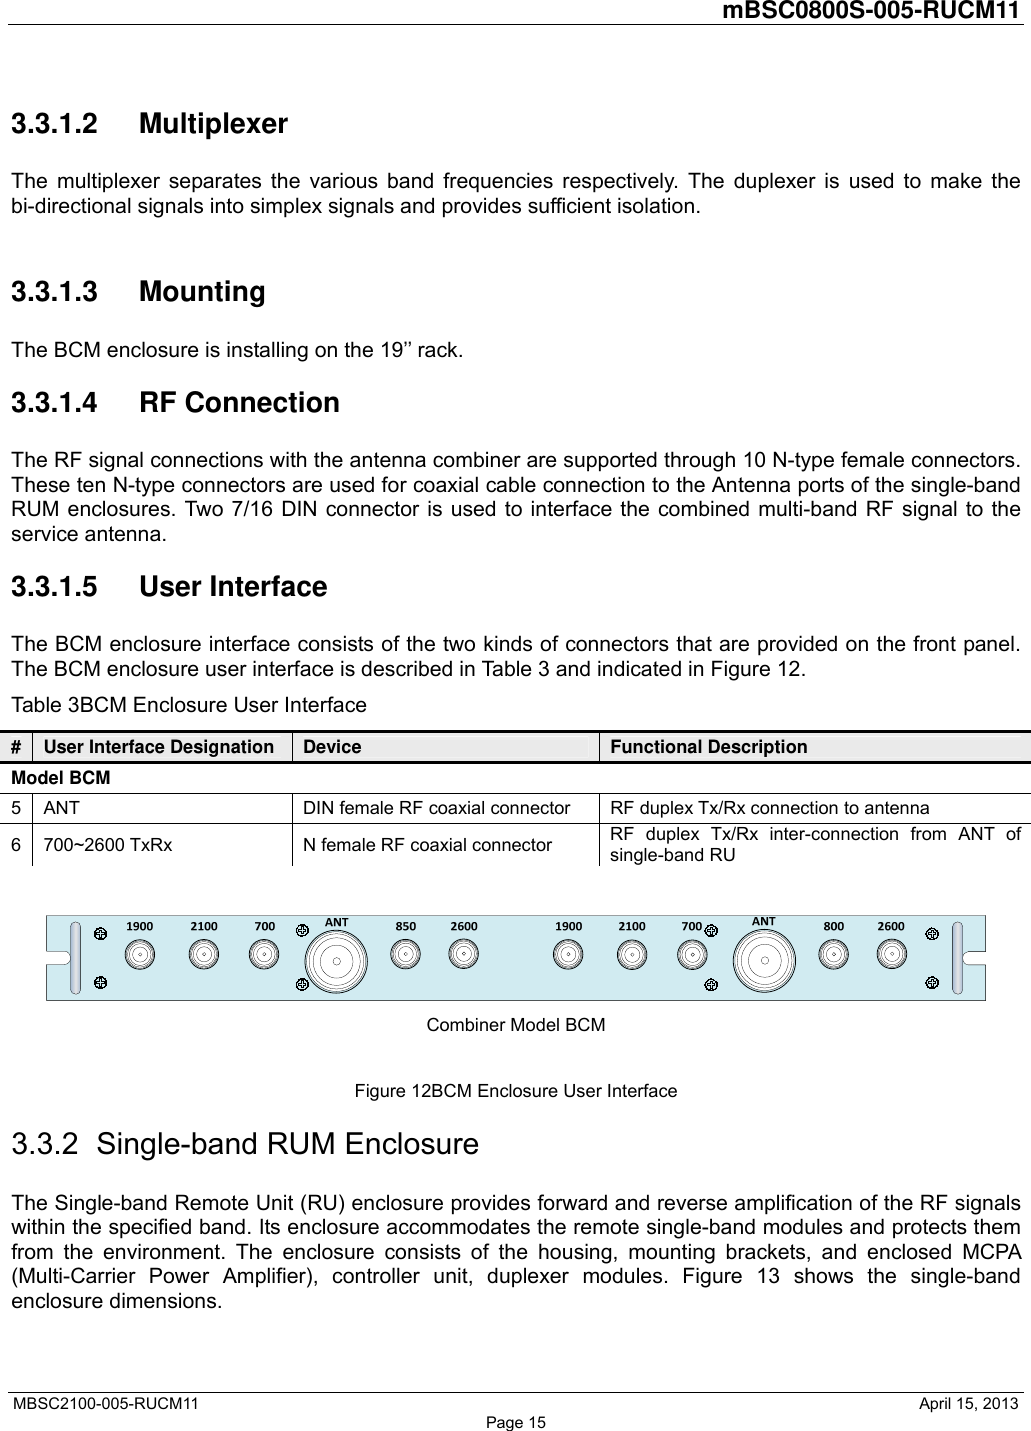         mBSC0800S-005-RUCM11   MBSC2100-005-RUCM11                                              April 15, 2013 Page 15 3.3.1.2 Multiplexer The multiplexer separates the various band frequencies respectively. The duplexer is used to make the bi-directional signals into simplex signals and provides sufficient isolation.  3.3.1.3 Mounting The BCM enclosure is installing on the 19’’ rack. 3.3.1.4 RF Connection The RF signal connections with the antenna combiner are supported through 10 N-type female connectors. These ten N-type connectors are used for coaxial cable connection to the Antenna ports of the single-band RUM enclosures. Two 7/16 DIN connector is used to interface the combined multi-band RF signal to the service antenna. 3.3.1.5 User Interface The BCM enclosure interface consists of the two kinds of connectors that are provided on the front panel. The BCM enclosure user interface is described in Table 3 and indicated in Figure 12. Table 3BCM Enclosure User Interface #  User Interface Designation Device  Functional Description Model BCM 5  ANT  DIN female RF coaxial connector  RF duplex Tx/Rx connection to antenna 6  700~2600 TxRx  N female RF coaxial connector  RF duplex Tx/Rx inter-connection from ANT of single-band RU   Combiner Model BCM  Figure 12BCM Enclosure User Interface 3.3.2 Single-band RUM Enclosure The Single-band Remote Unit (RU) enclosure provides forward and reverse amplification of the RF signals within the specified band. Its enclosure accommodates the remote single-band modules and protects them from the environment. The enclosure consists of the housing, mounting brackets, and enclosed MCPA (Multi-Carrier Power Amplifier), controller unit, duplexer modules. Figure 13 shows the single-band enclosure dimensions. 